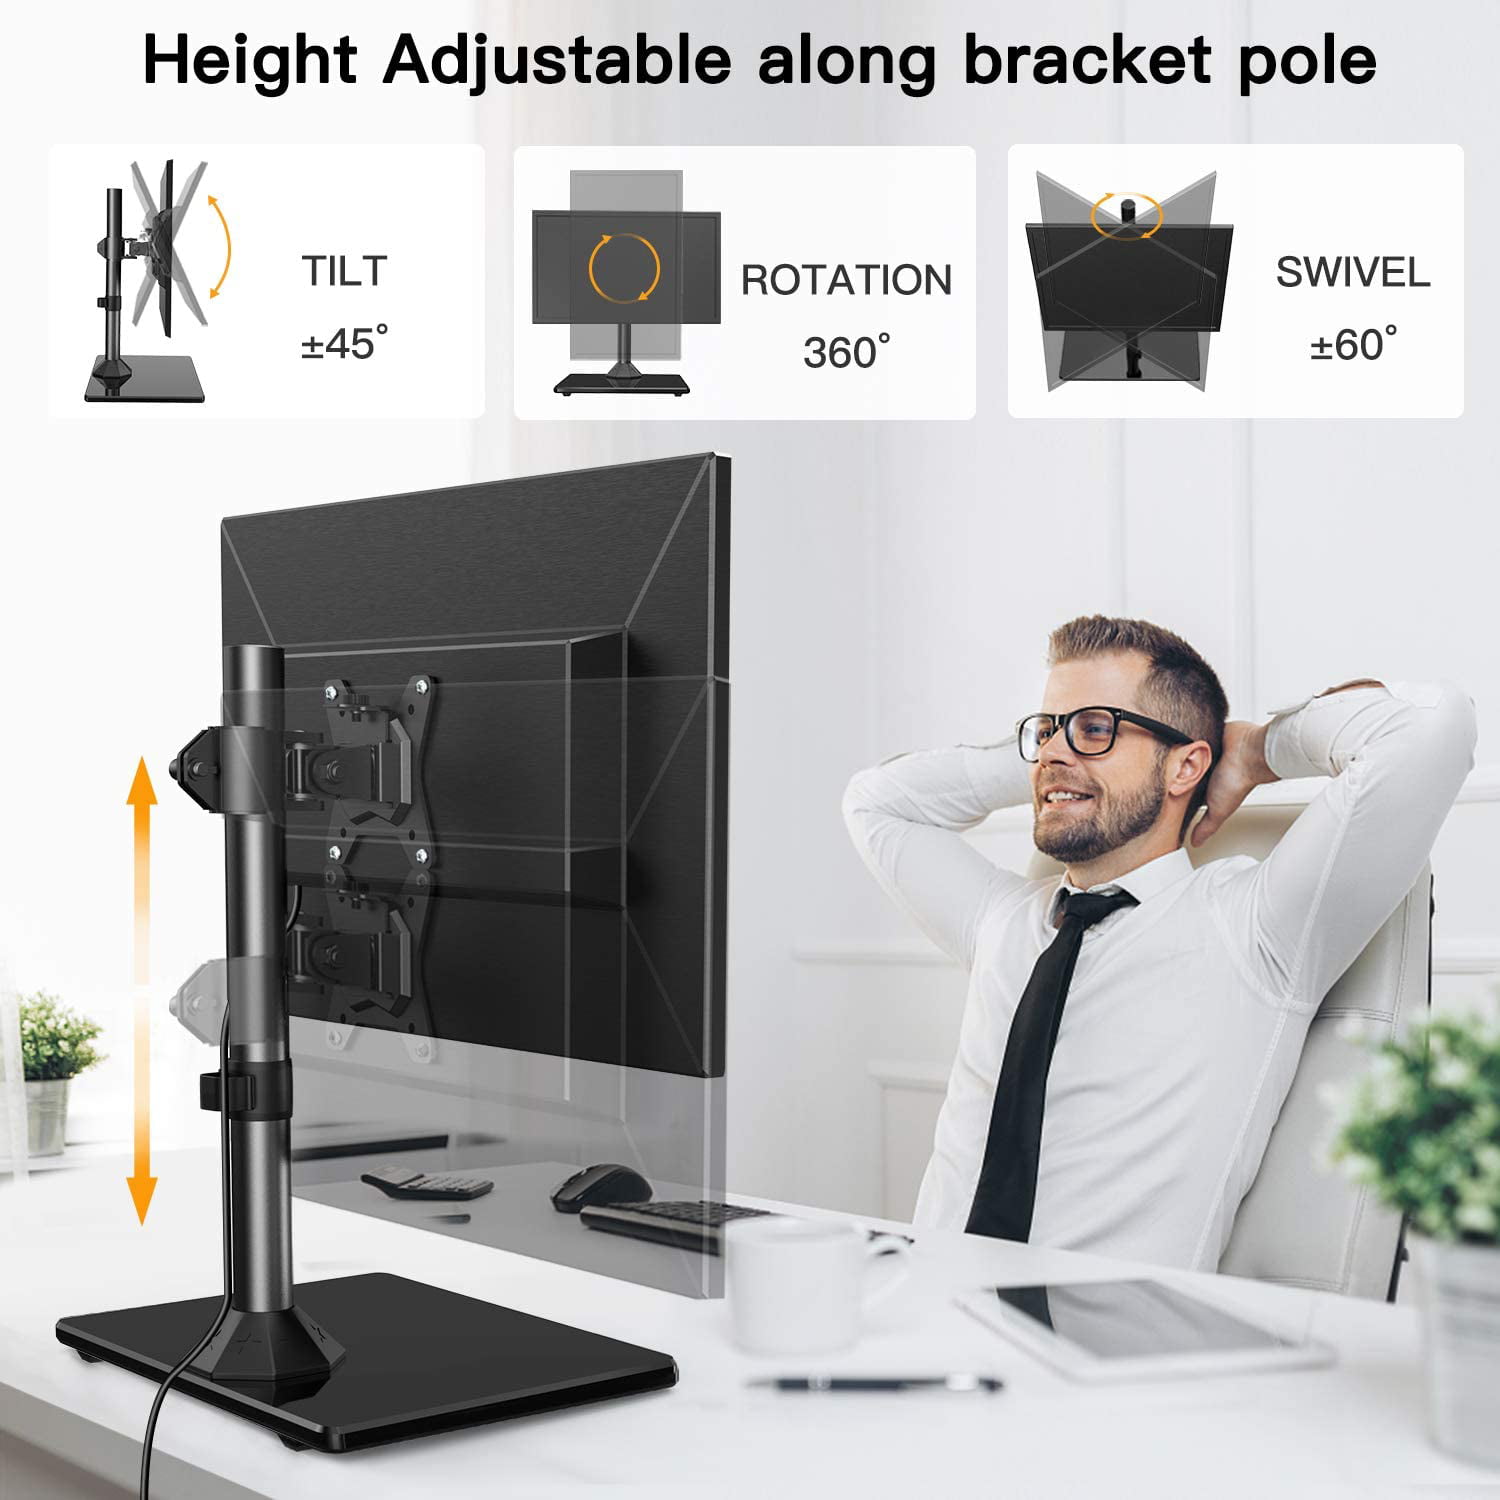 Tilt HUANUO Single Monitor Stand Free Standing Full Motion Desk Mount Riser fits 13 to 32 inch Screens with Adjustable Height Rotation Swivel 